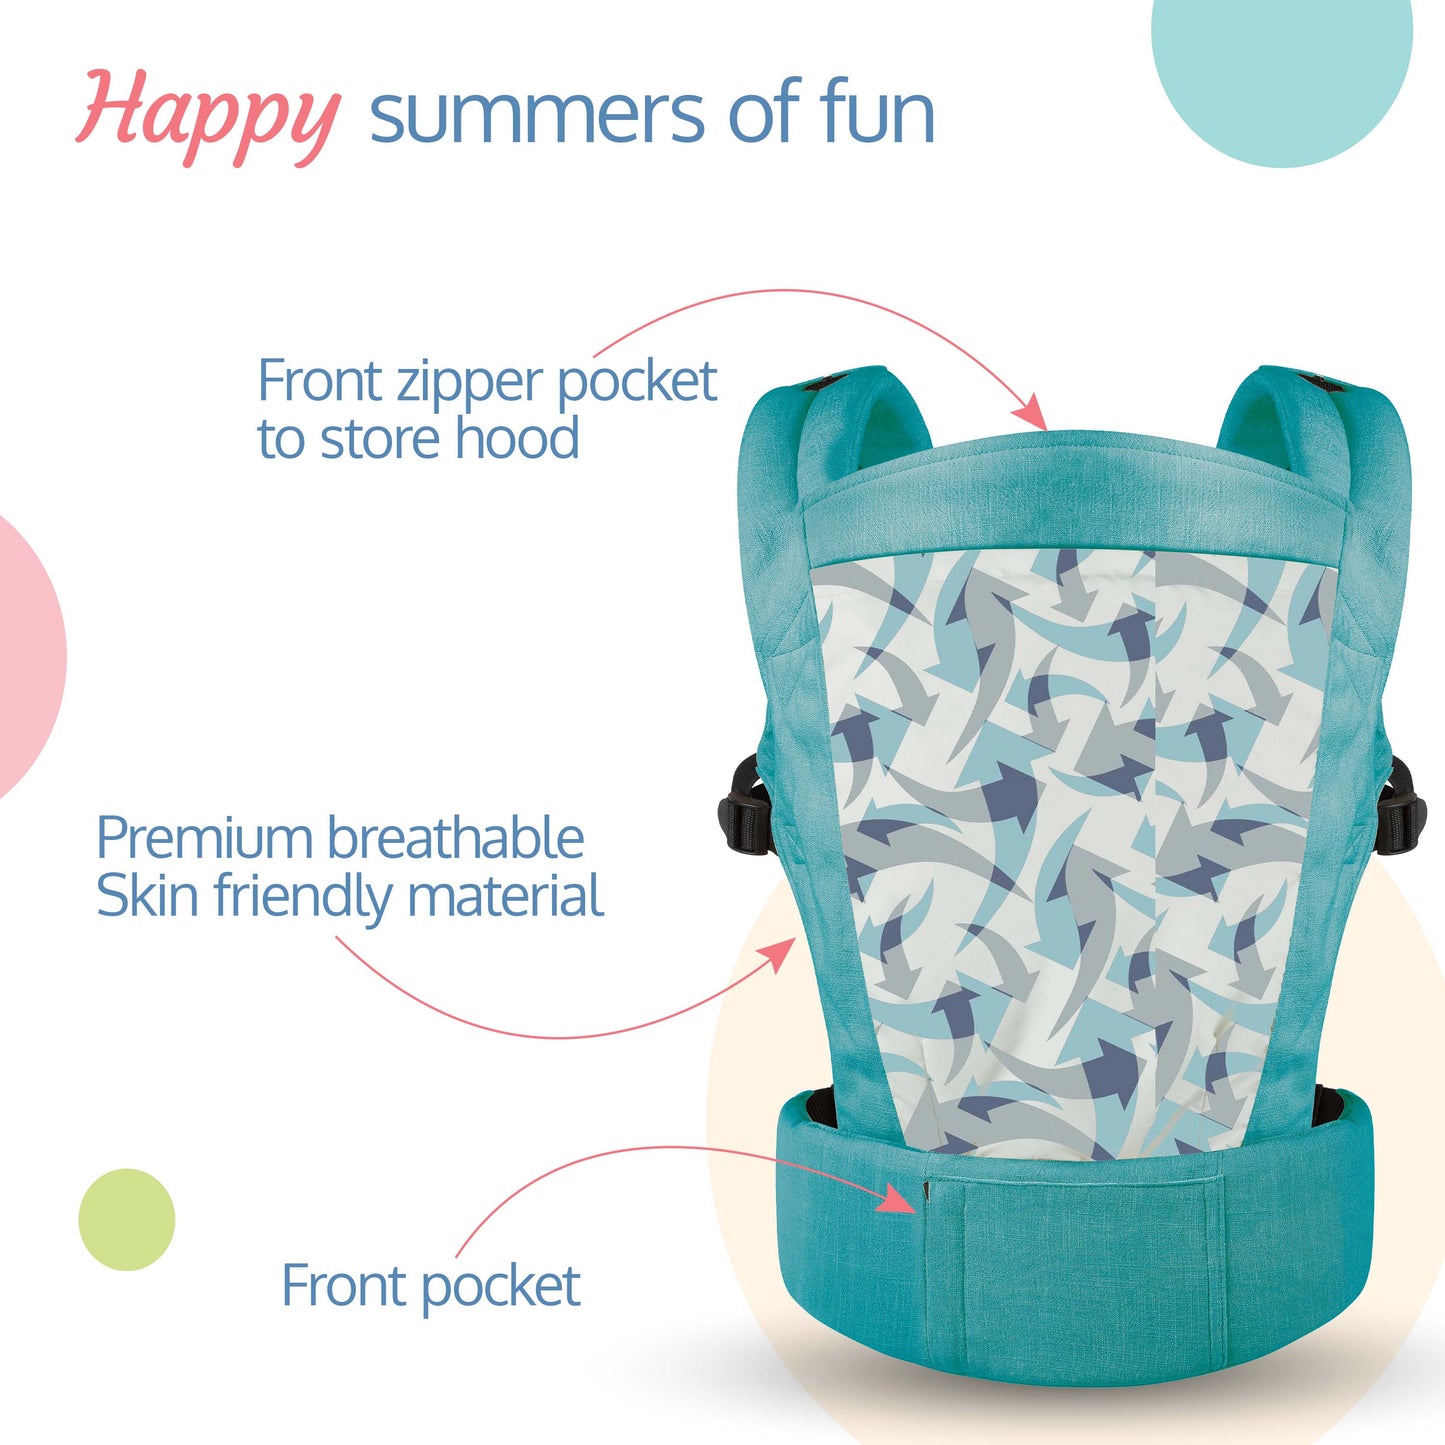 Adore Baby Carrier with 2 Carry Positions, Carrier for 4 to 24 Months Baby, Breathable Skin Friendly Premium Fabric, Adjustable Newborn to Toddler Carrier, Max Weight Upto 18 Kgs (Light Blue)